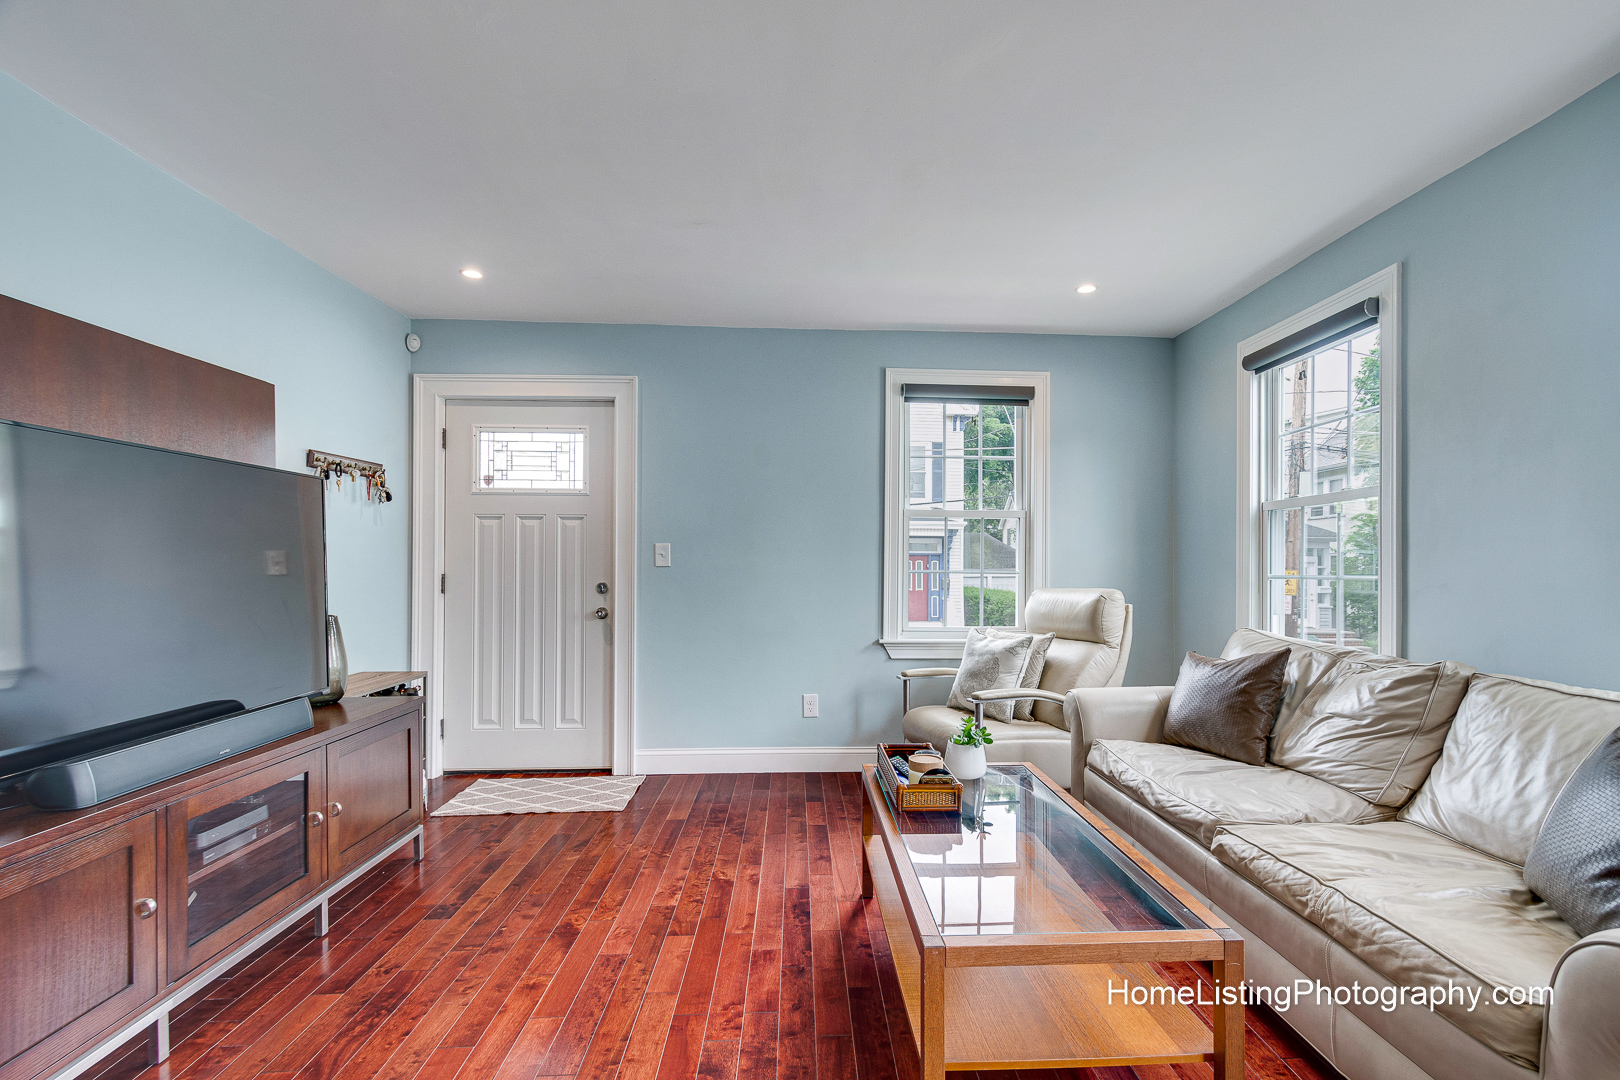 Thomas Adach - Medford MA professional real estate photographer - 508-655-2225 Home Listing Photography